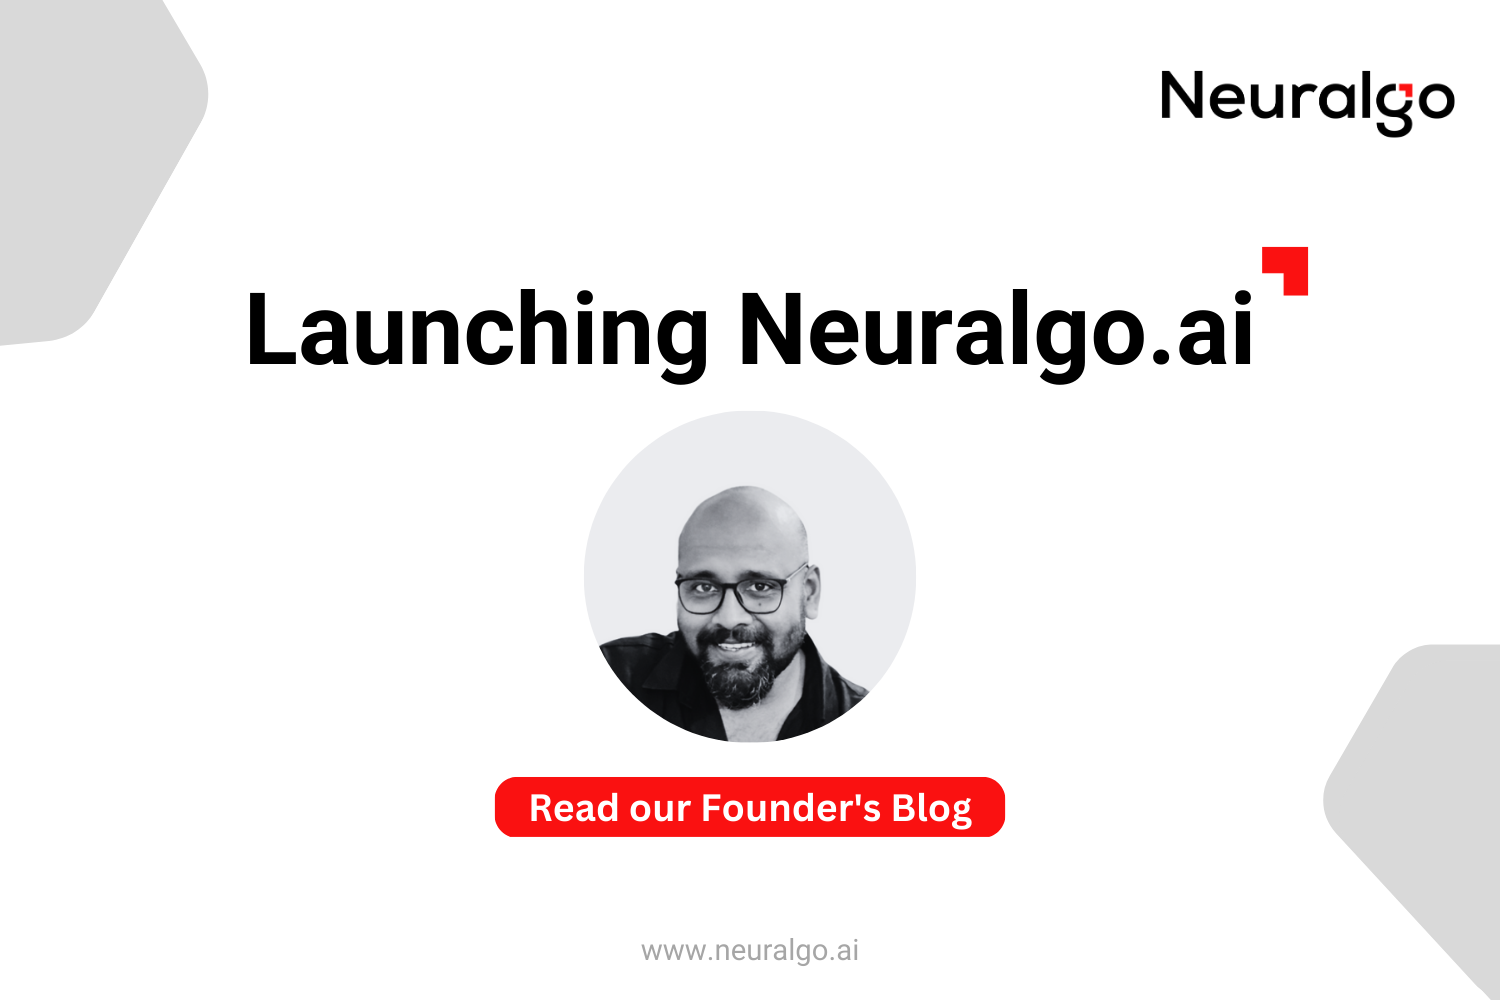 Launch of our new venture, Neuralgo.ai